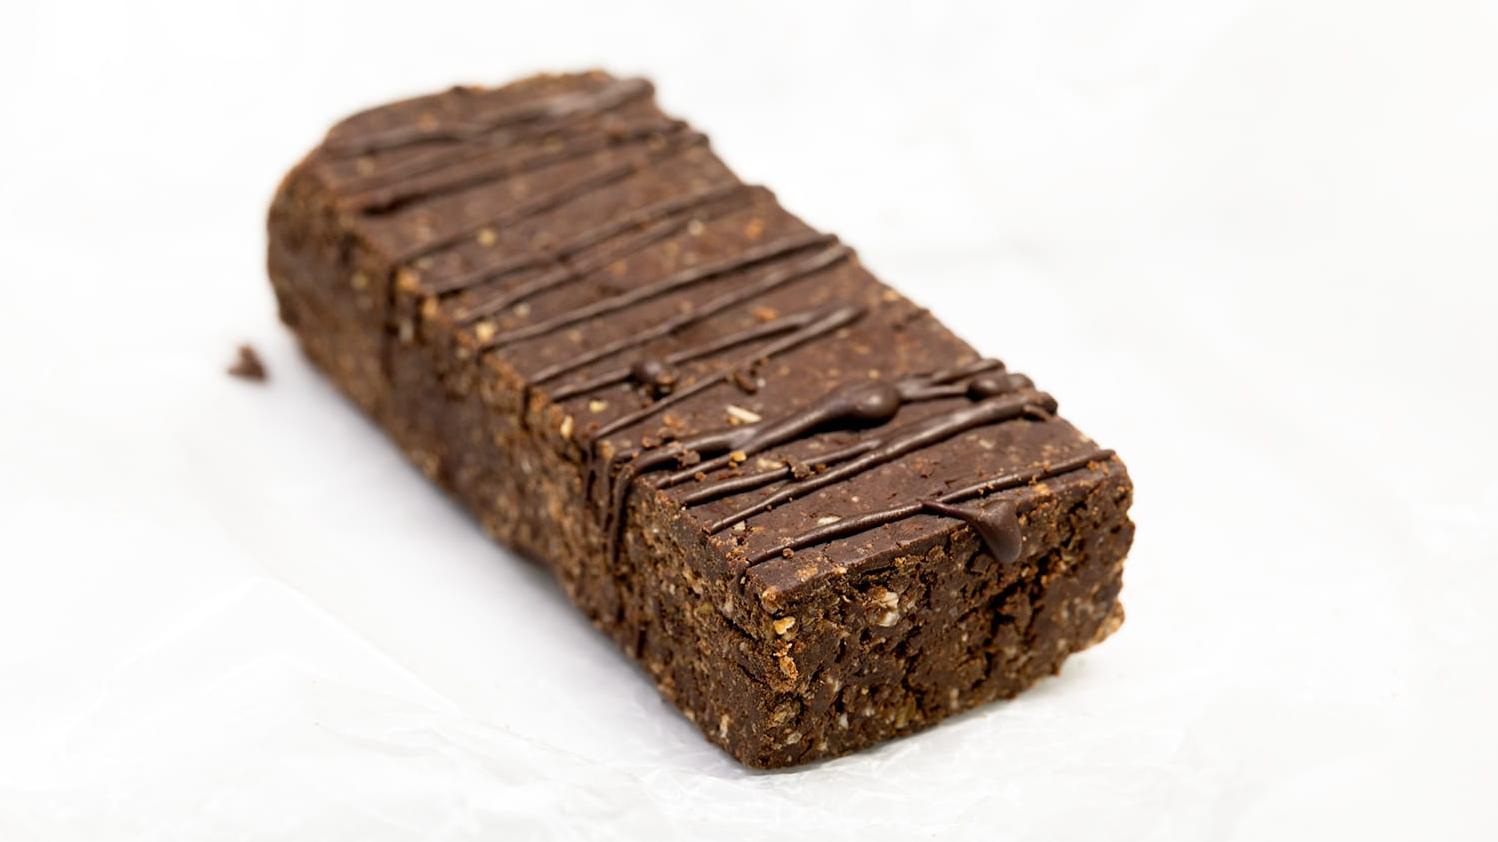  Make a batch of these protein bars ahead of time to have a healthy snack option available whenever hunger strikes.